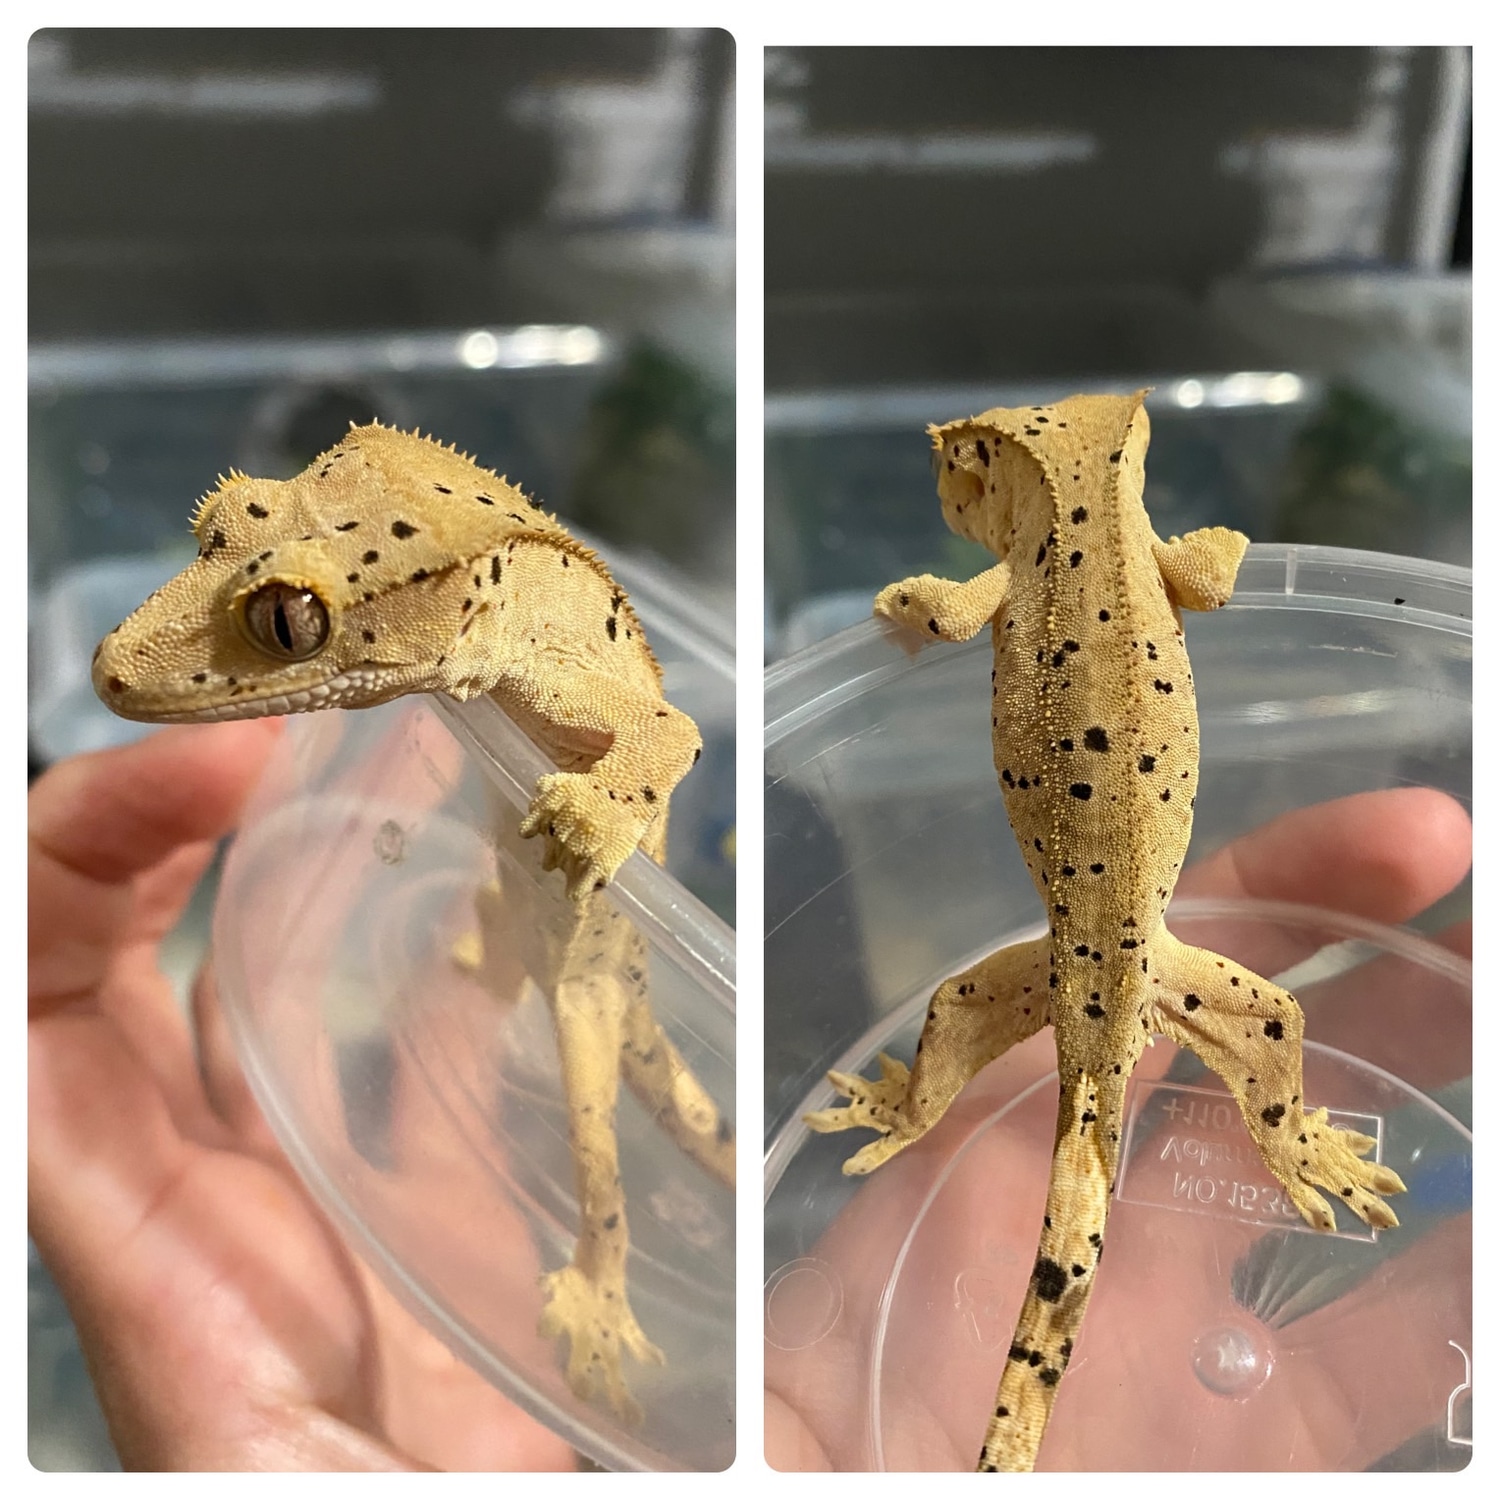 Dalmation Crested Gecko by Sweet Tooth Geckos